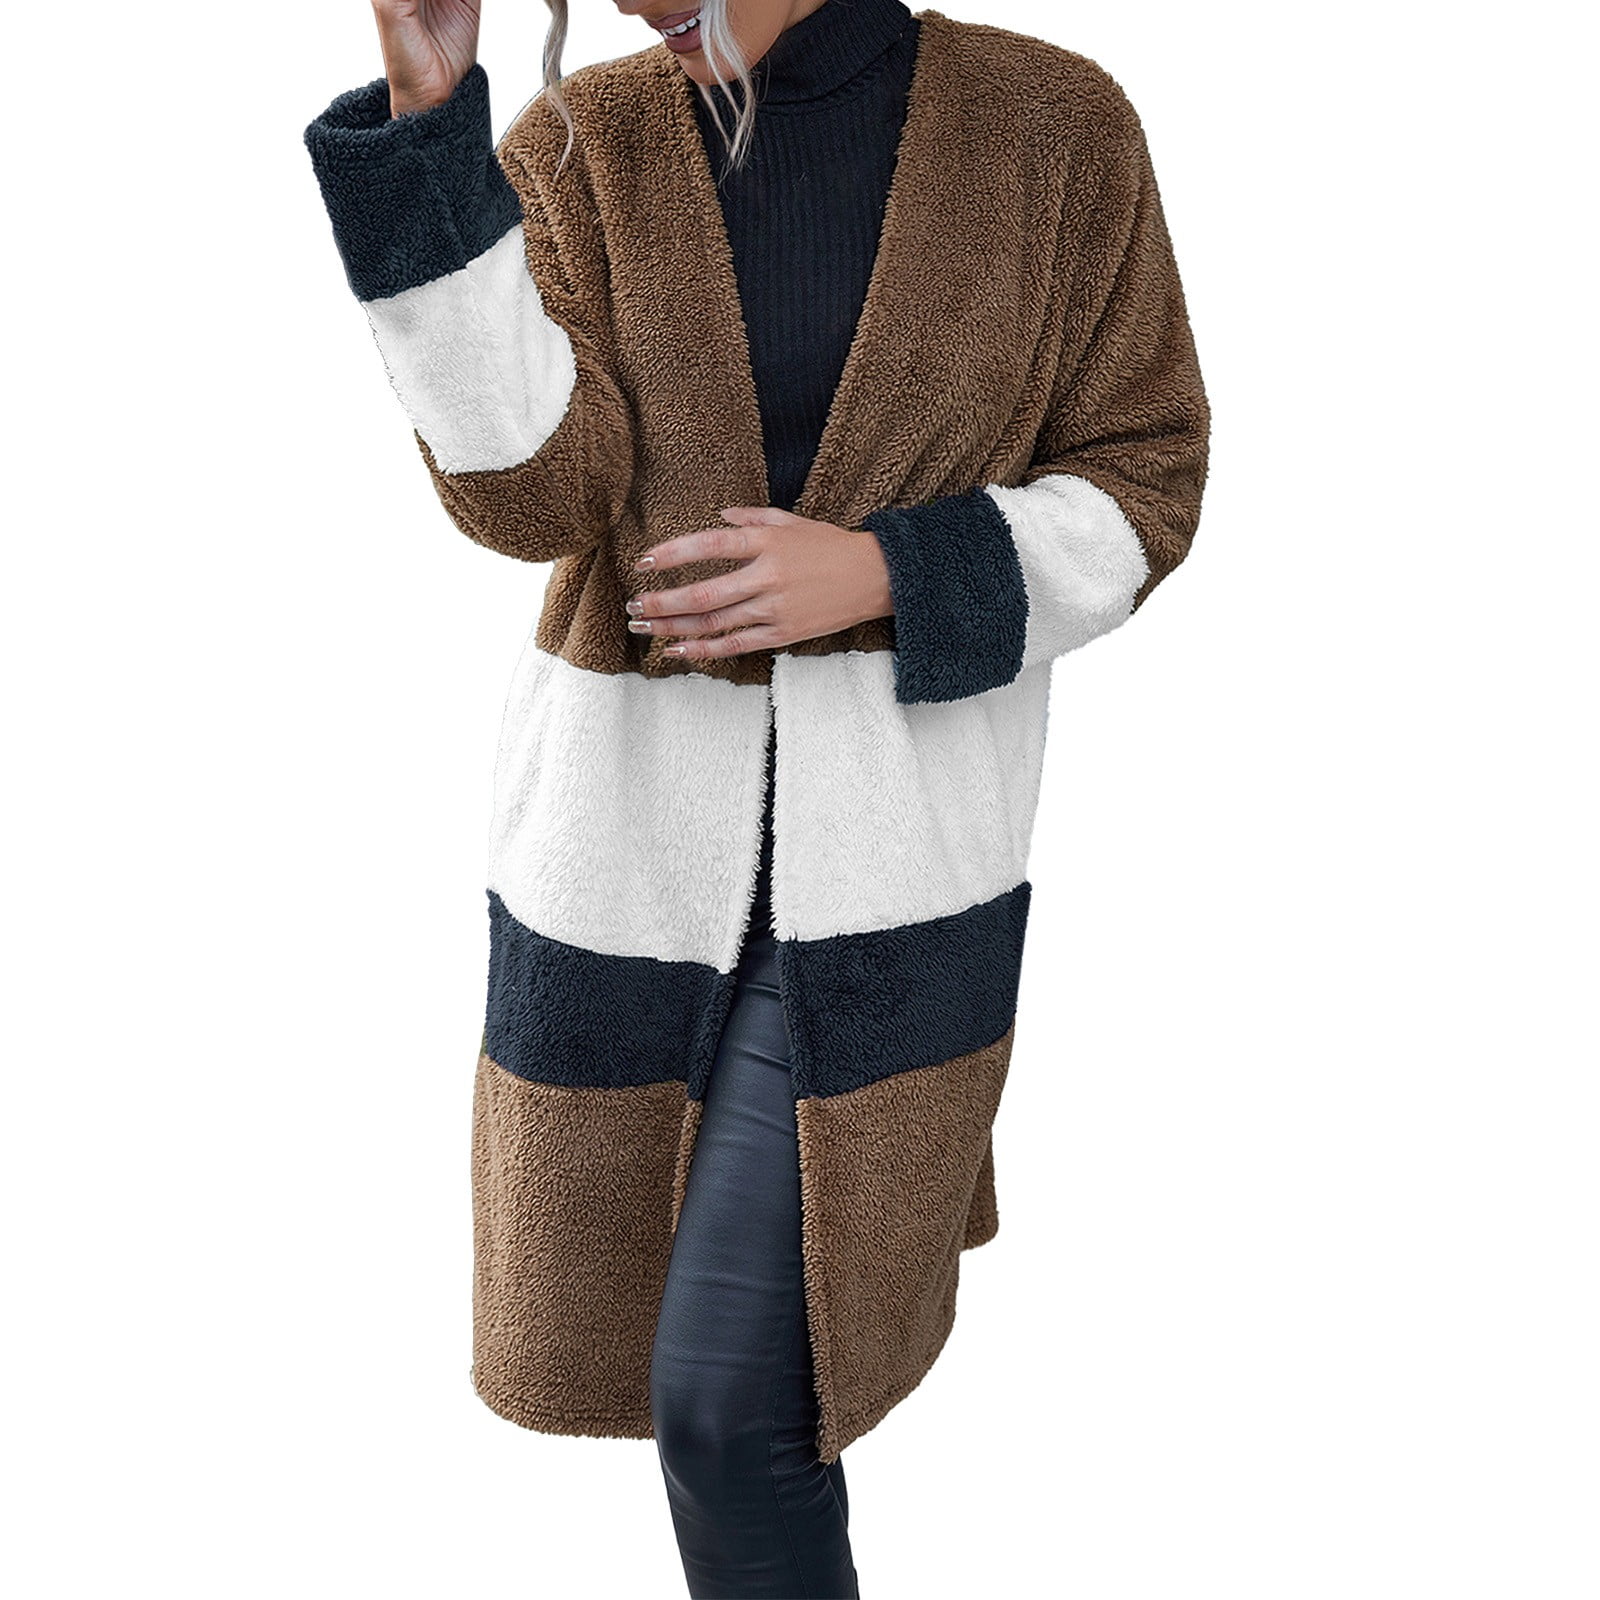 HSMQHJWE Sweater With Elbow Patches Women Long Coat Women Winter